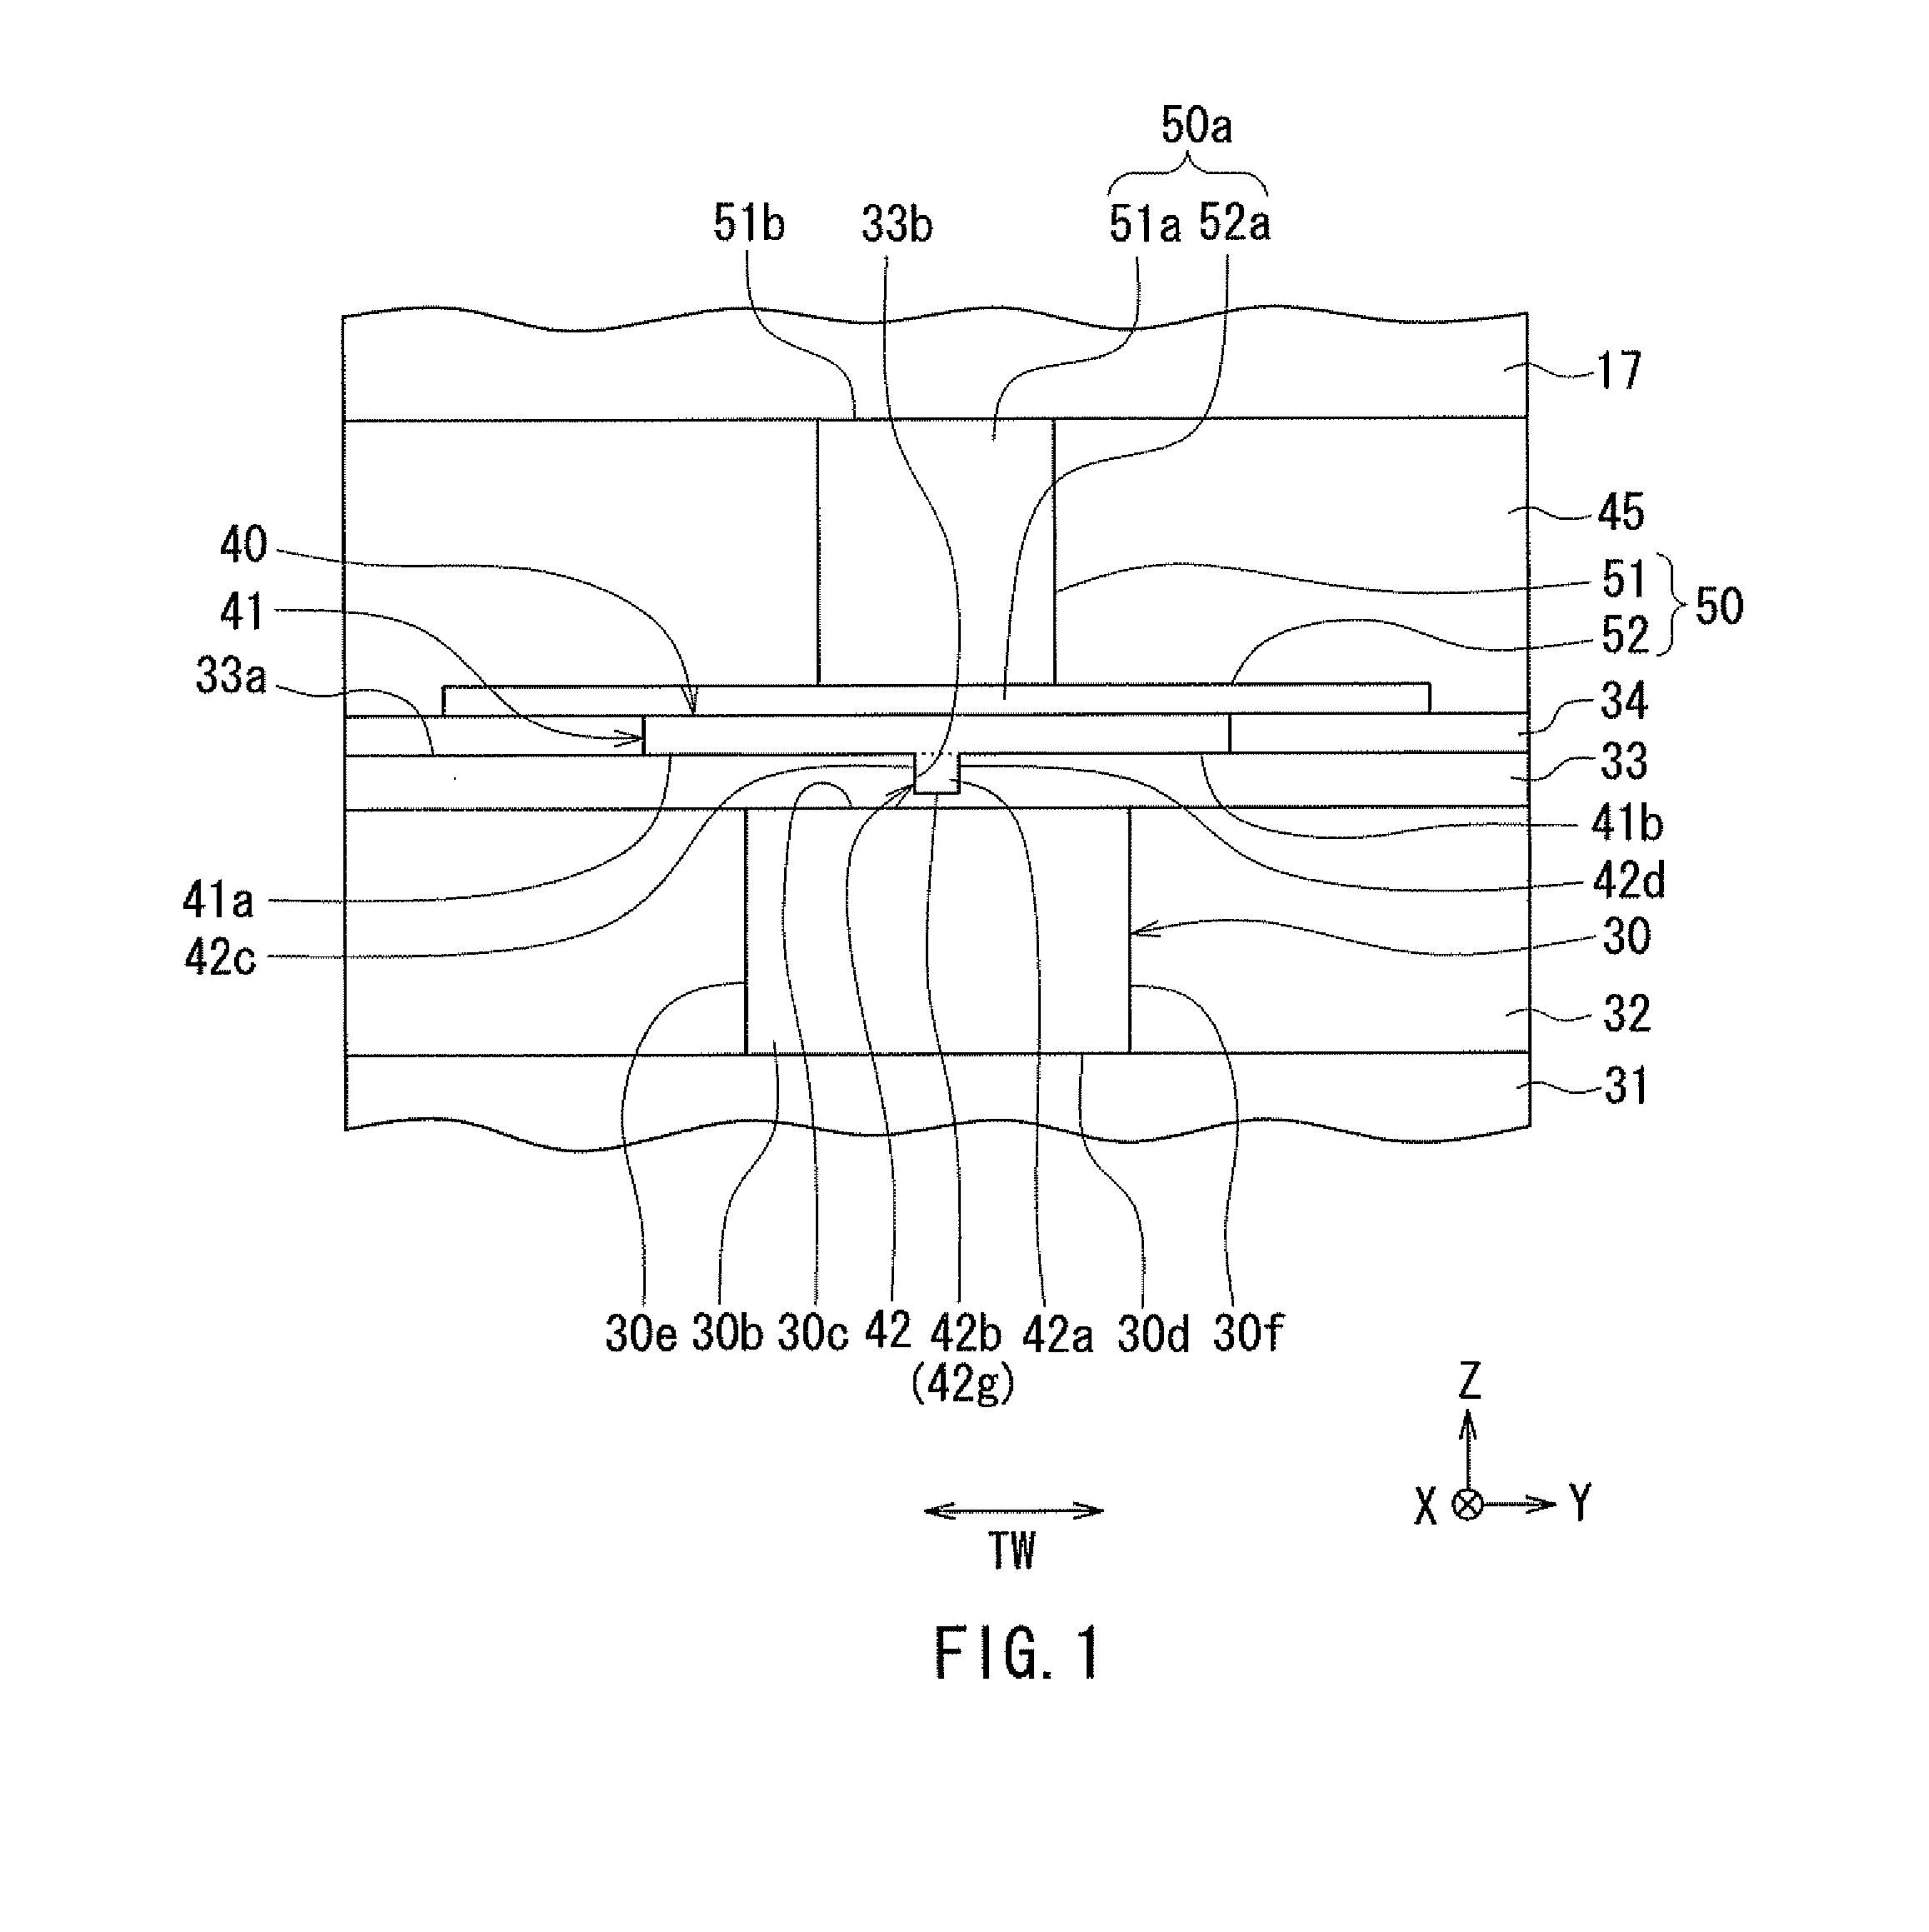 Thermally-assisted magnetic recording head including a magnetic pole and a heating element